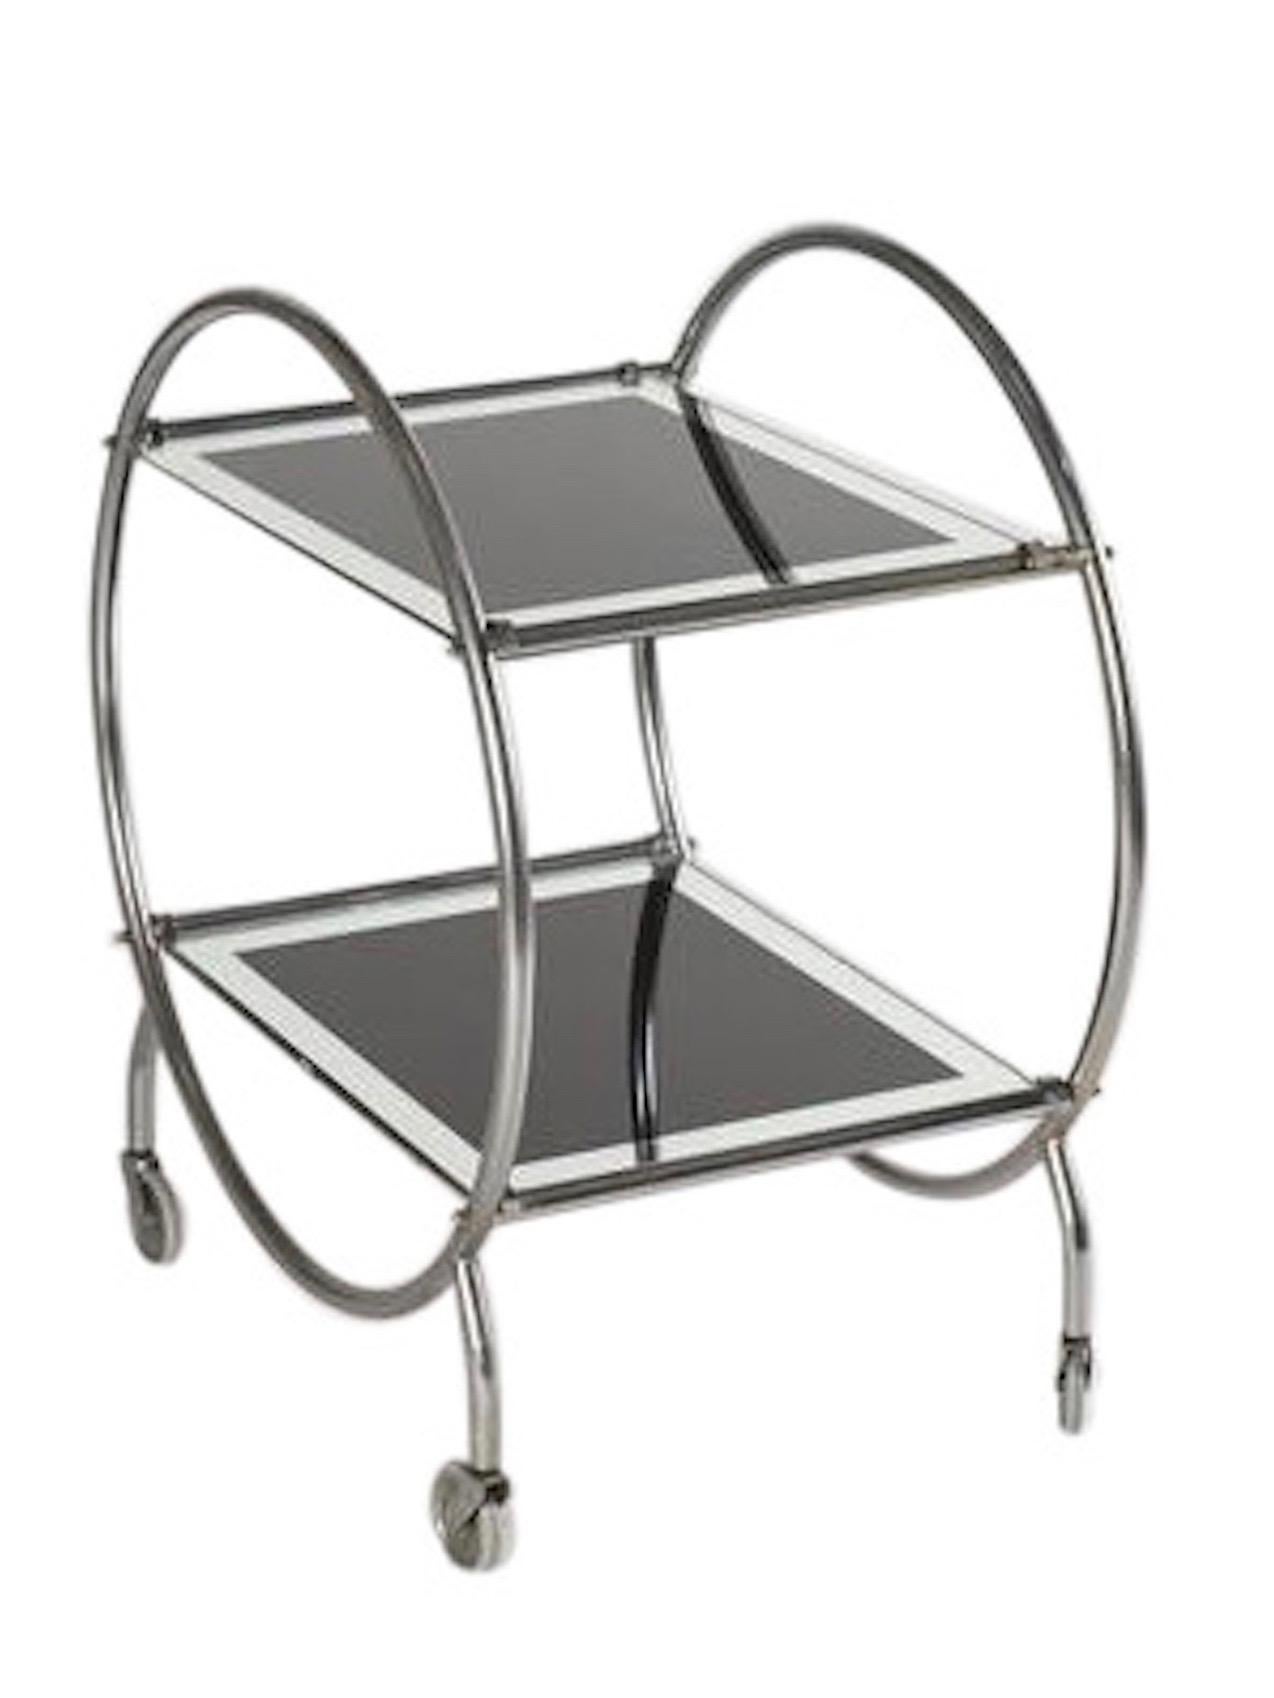 Polychromed Round English Bar Cart in Original Chrome with Glass Shelves, 1930s For Sale